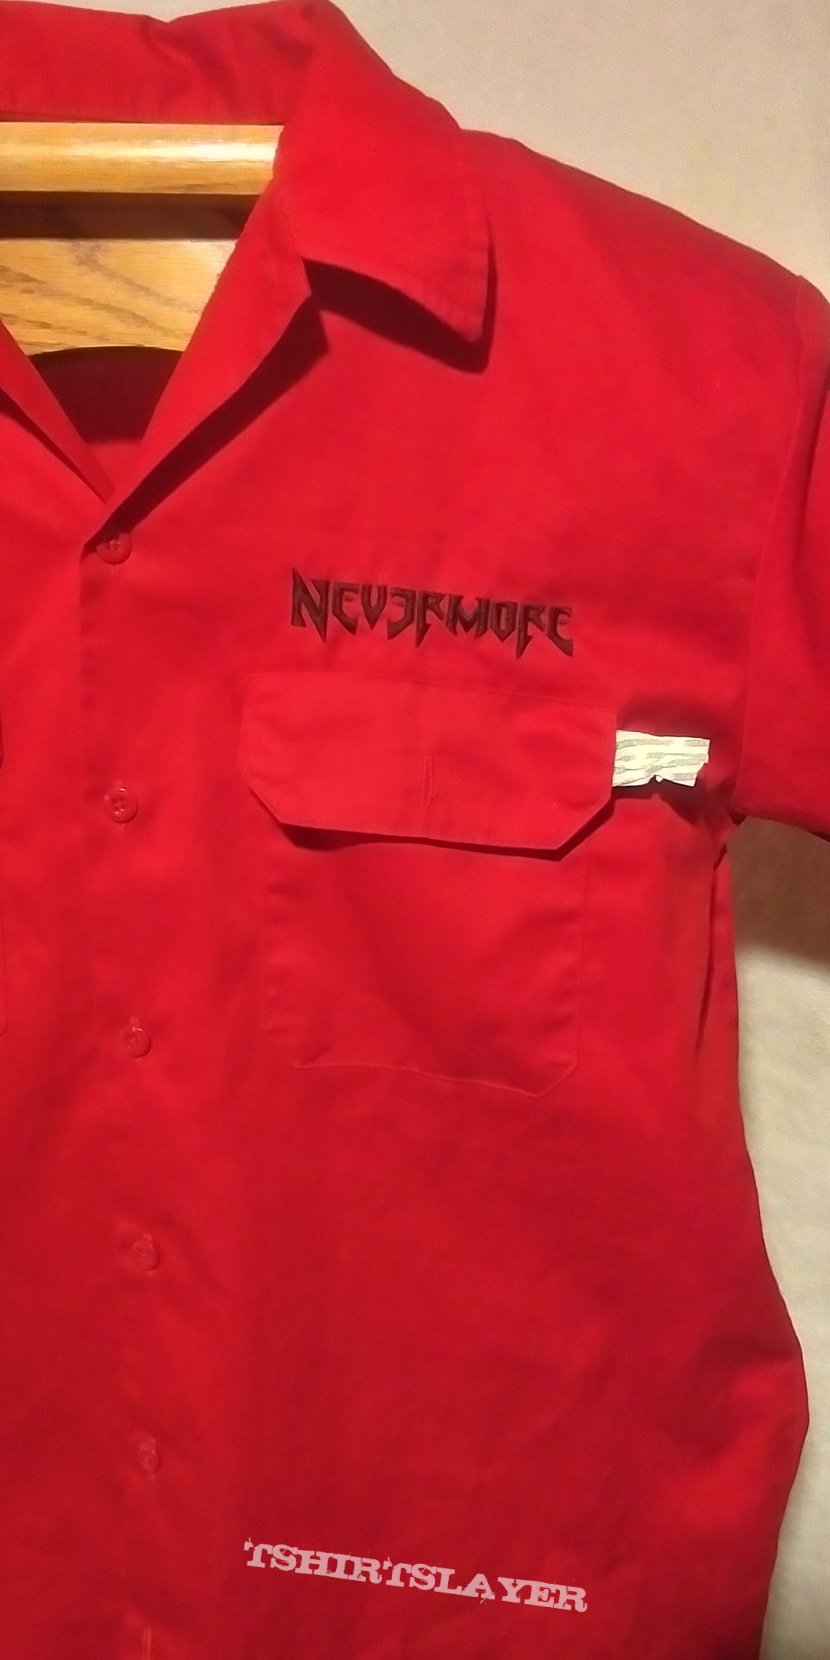 Nevermore Warrel Dane Stage Used Red dickies Work shirt